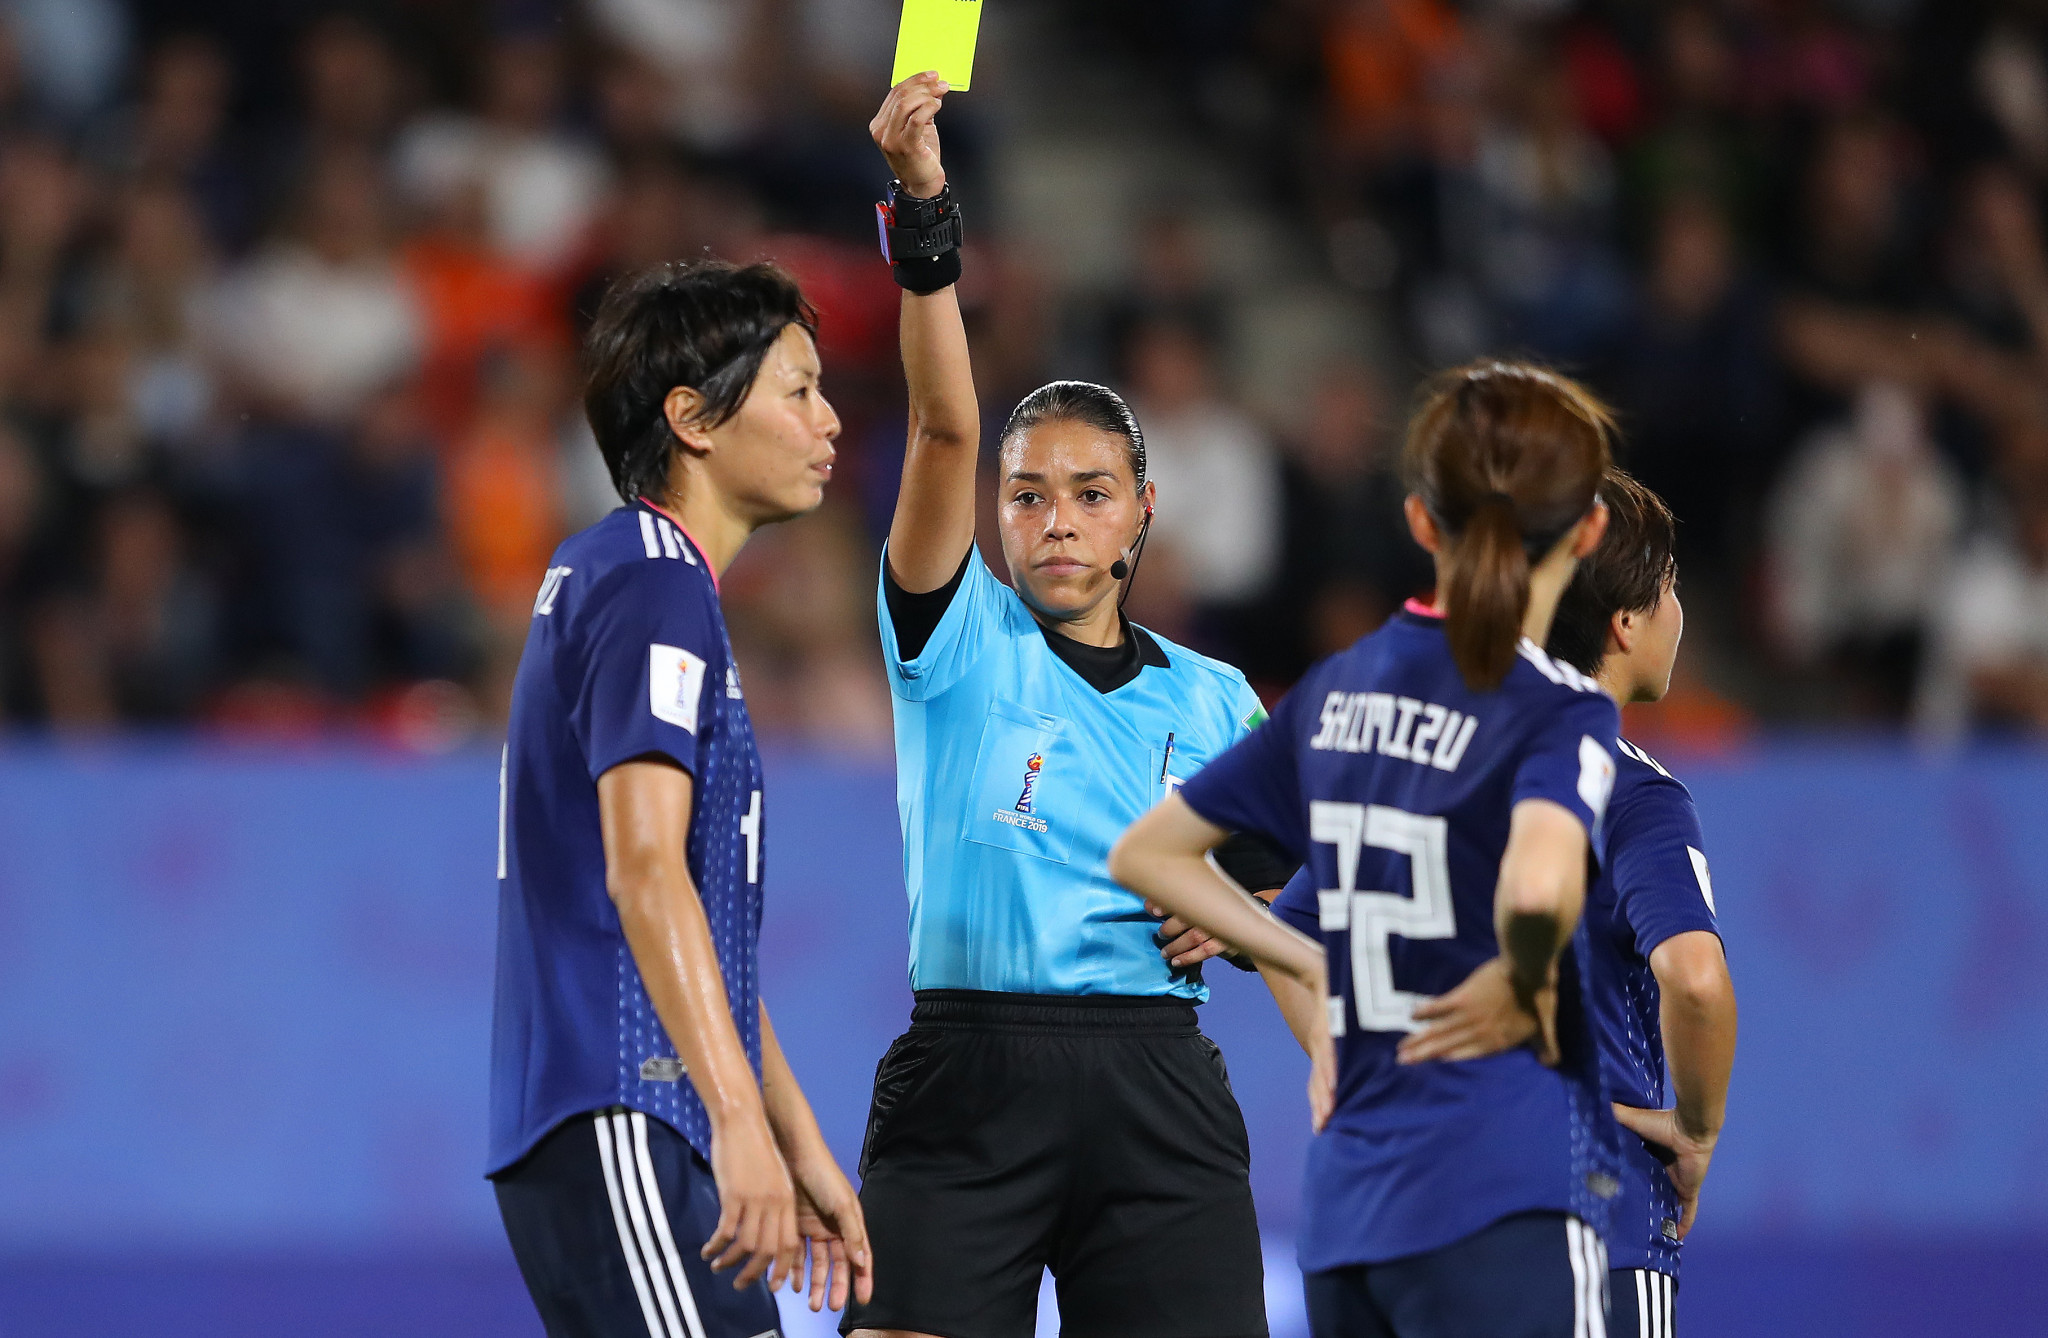 It came after Saki Kumagai handled the ball in the box, for which she was booked ©Getty Images